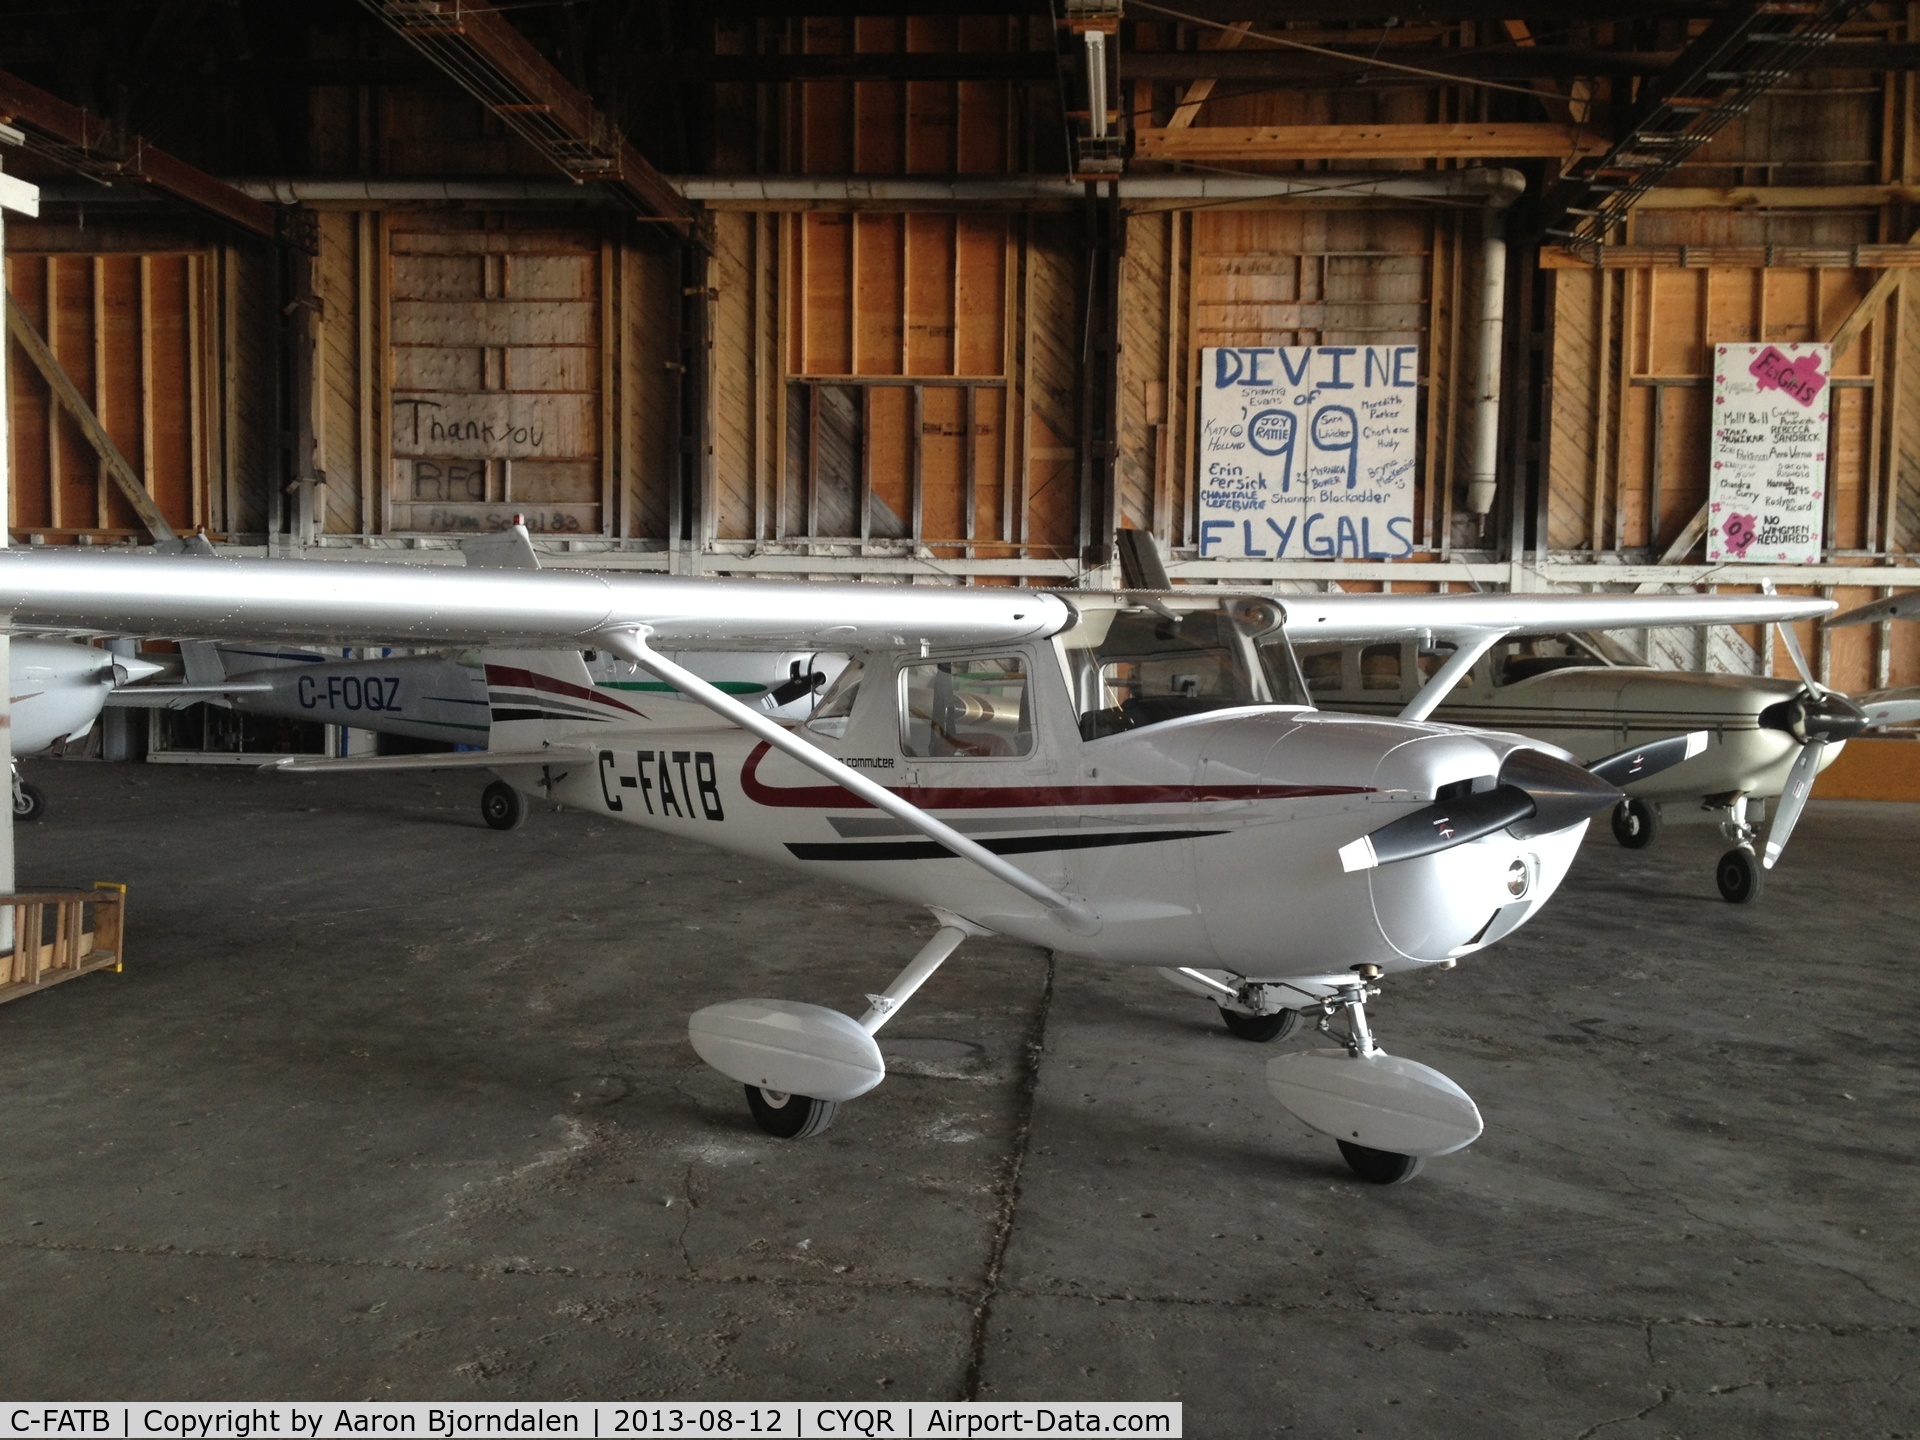 C-FATB, 1970 Cessna 150L C/N 15072352, Former N6852G; restored after being disassembled and deregistered.